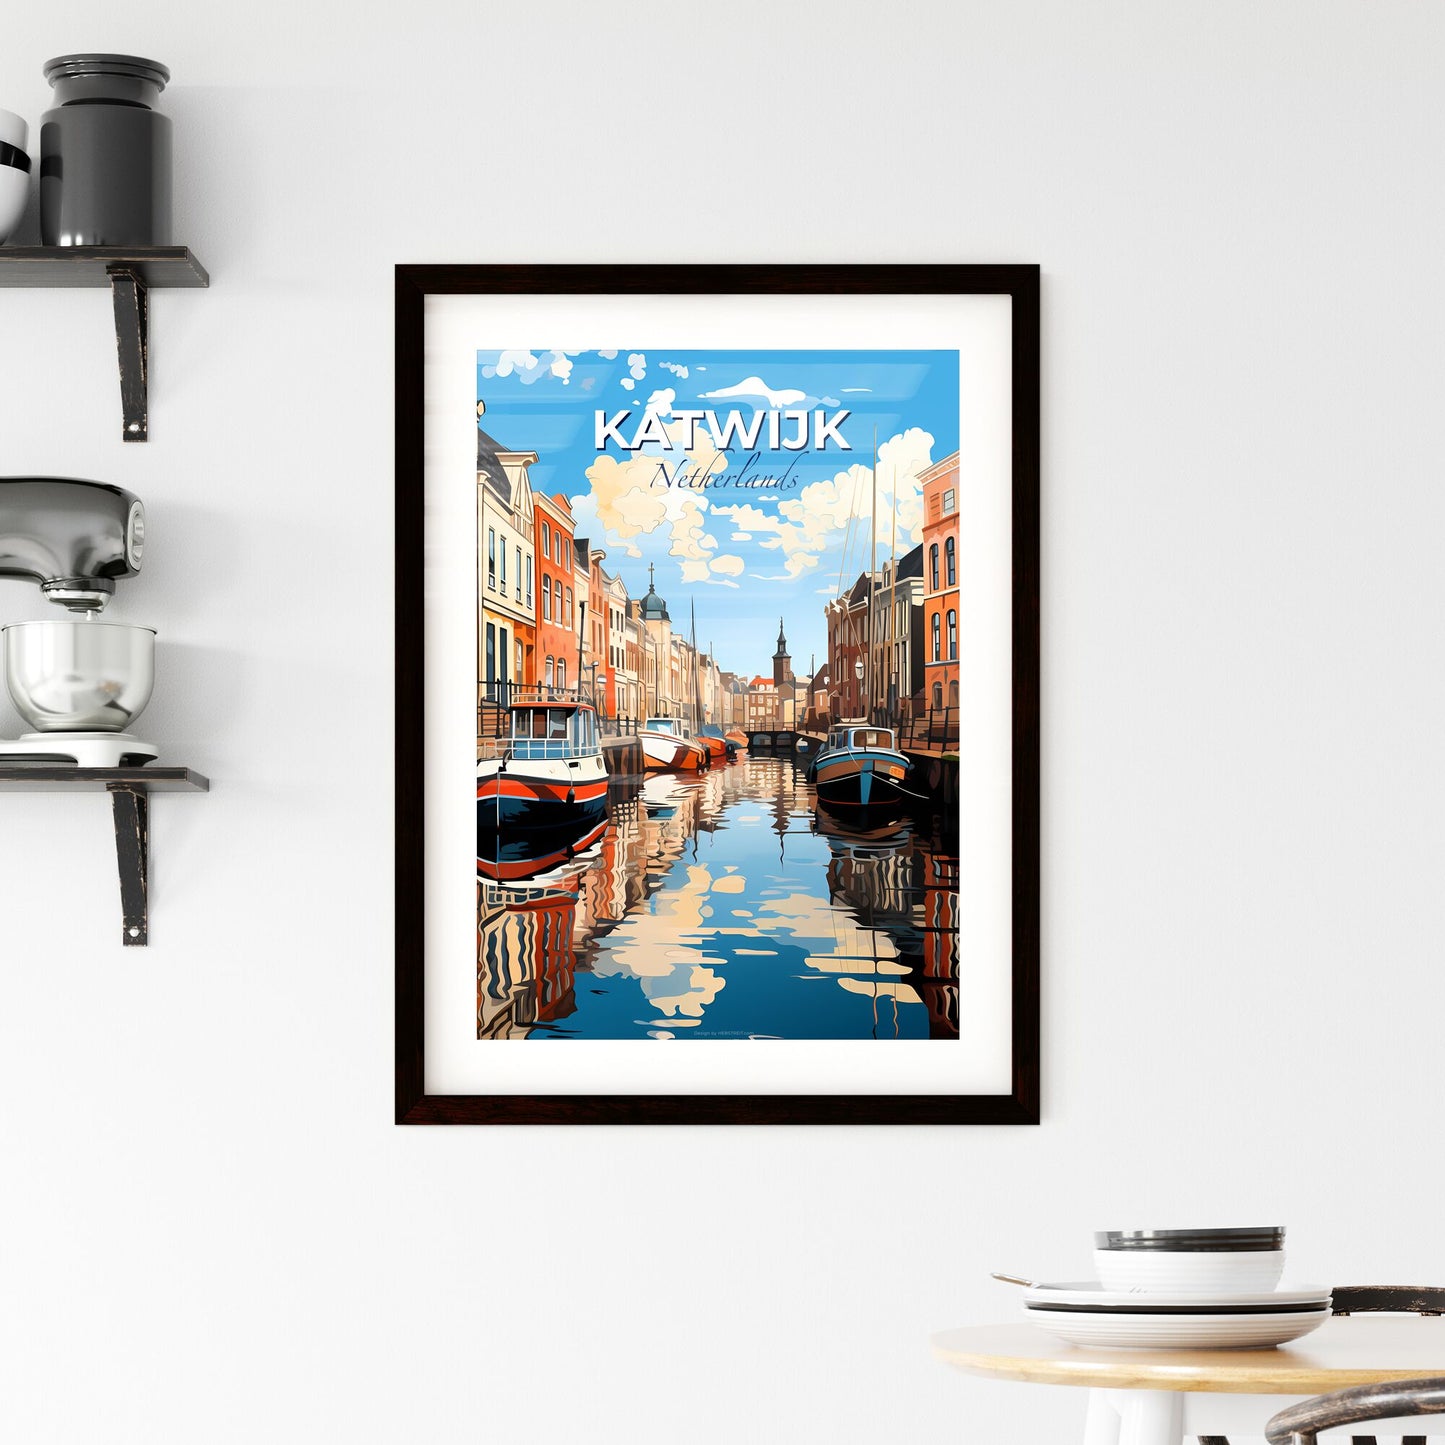 Katwijk, Netherlands, A Poster of boats on a canal in a city Default Title